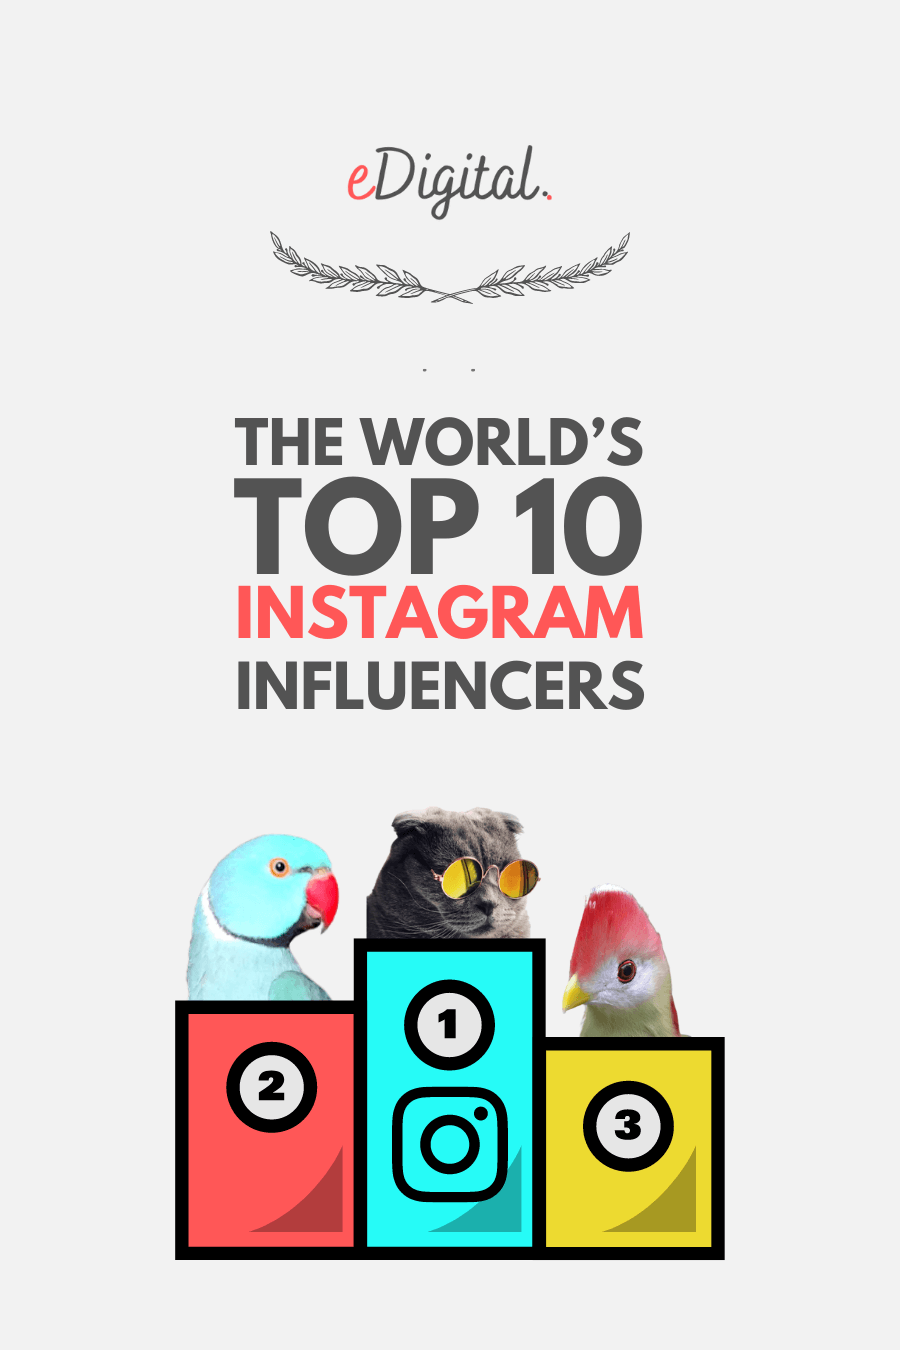 top 10 Instagram influencers in the world list